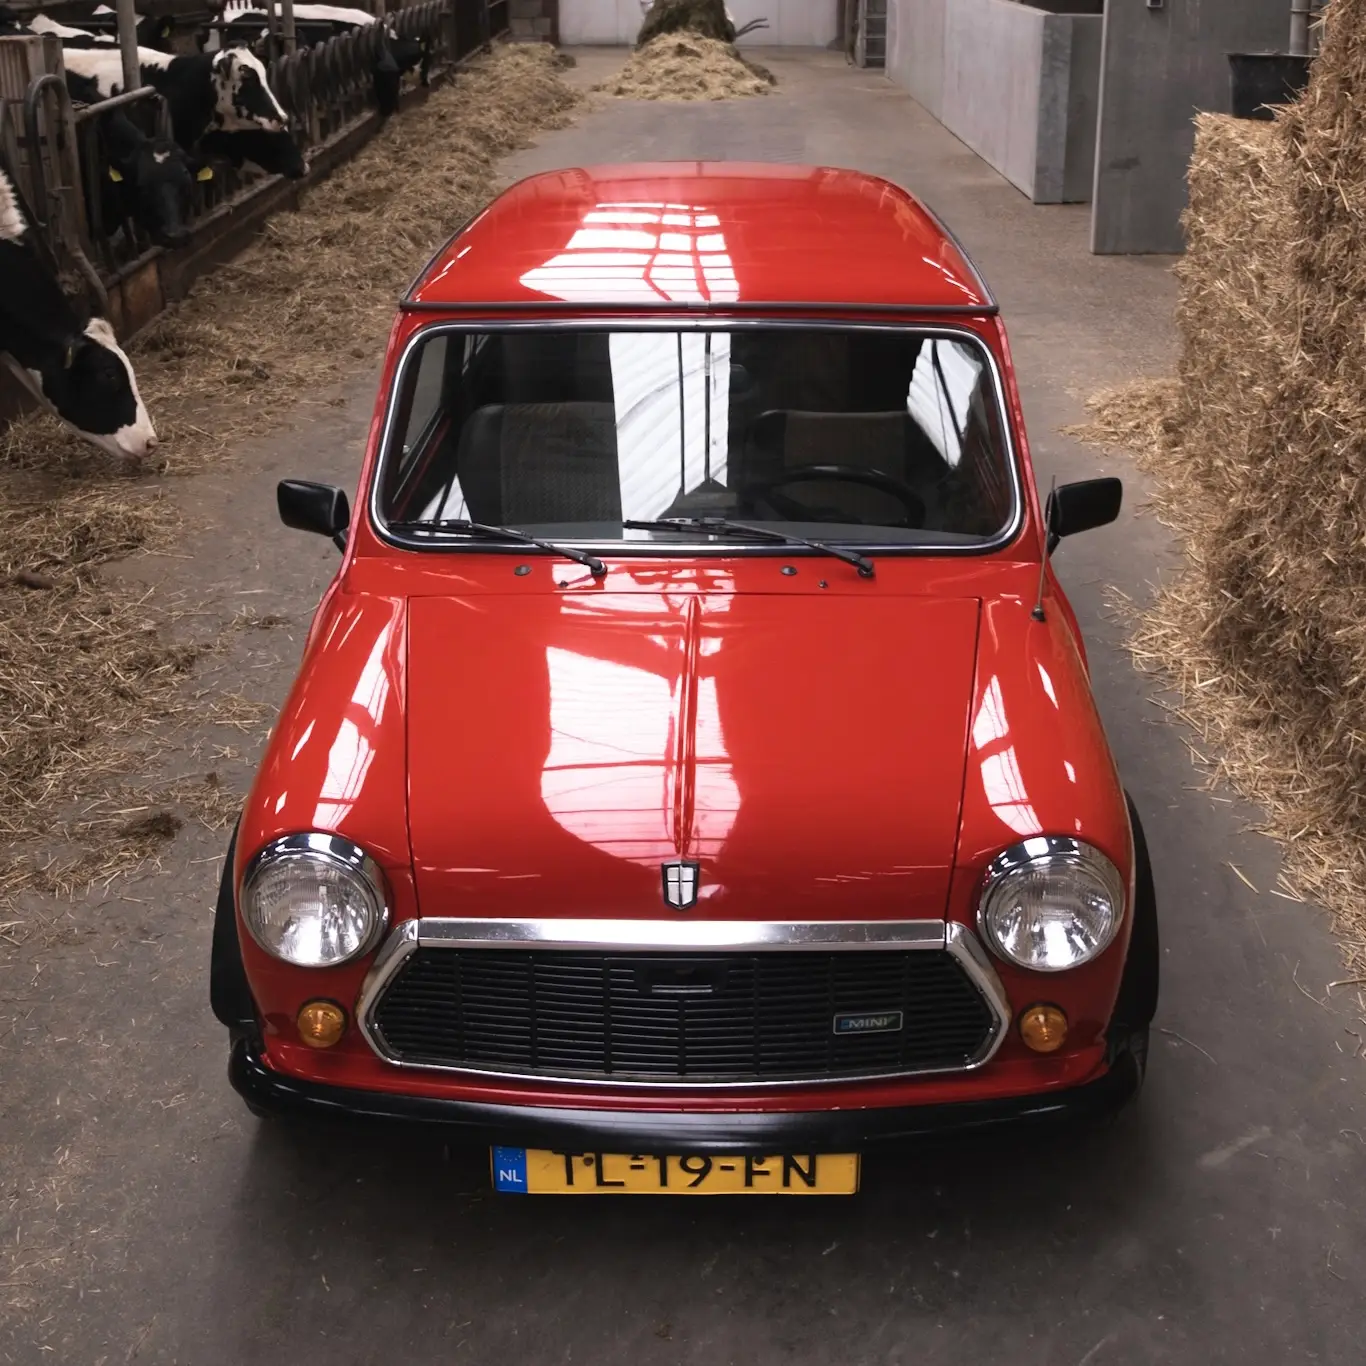 A red Austin Mini 1000 E Magic standing in a barn with the coating shining bright